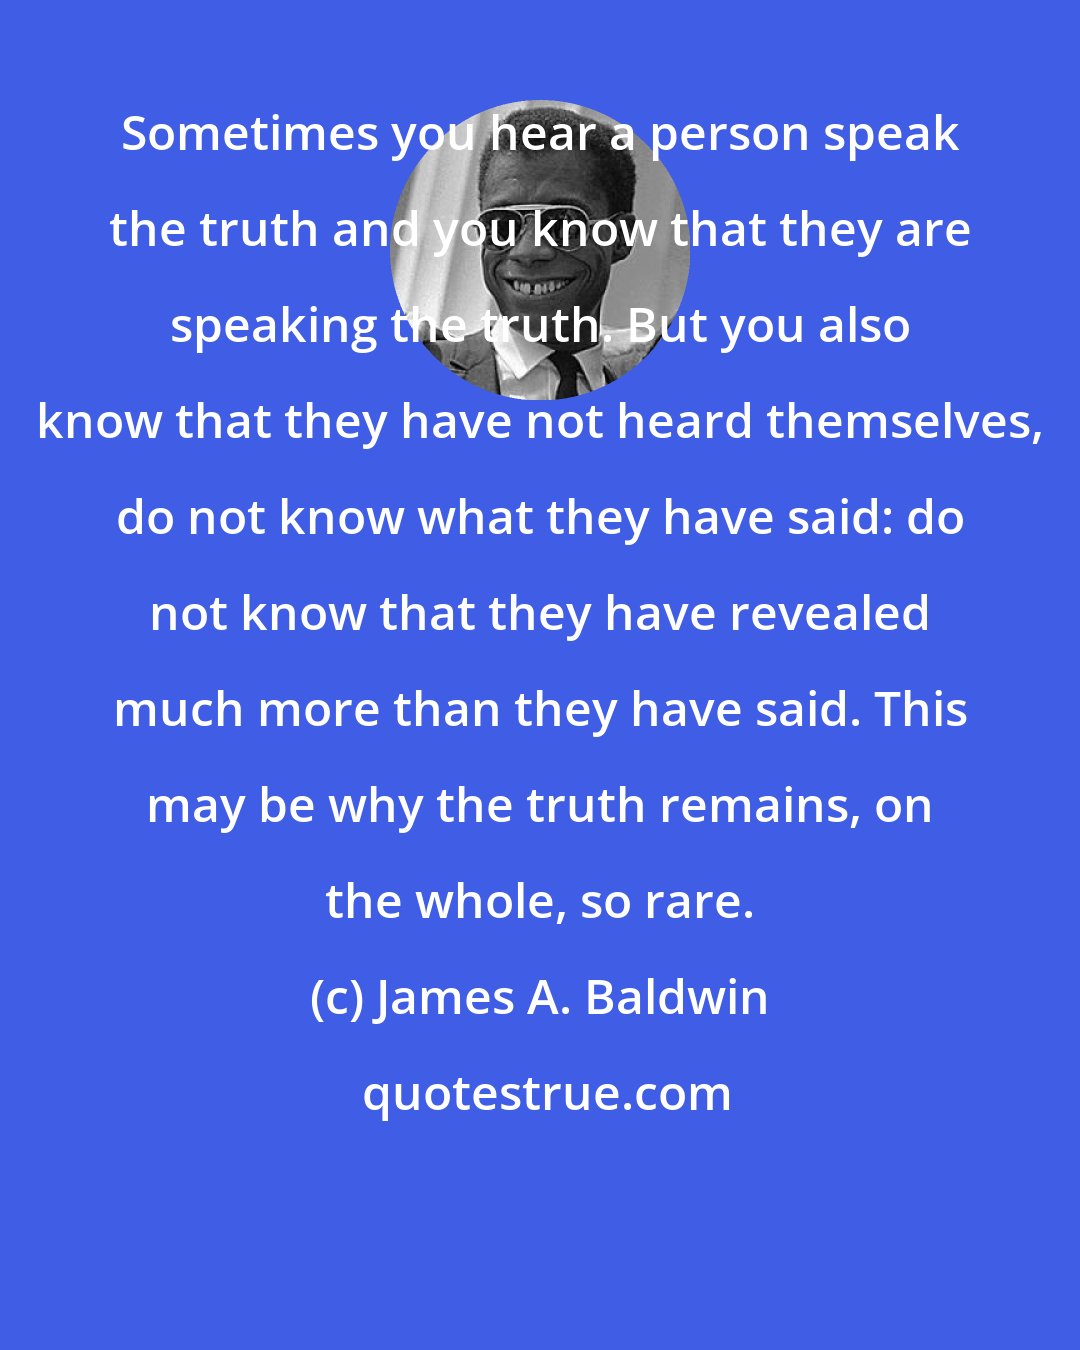 James A. Baldwin: Sometimes you hear a person speak the truth and you know that they are speaking the truth. But you also know that they have not heard themselves, do not know what they have said: do not know that they have revealed much more than they have said. This may be why the truth remains, on the whole, so rare.